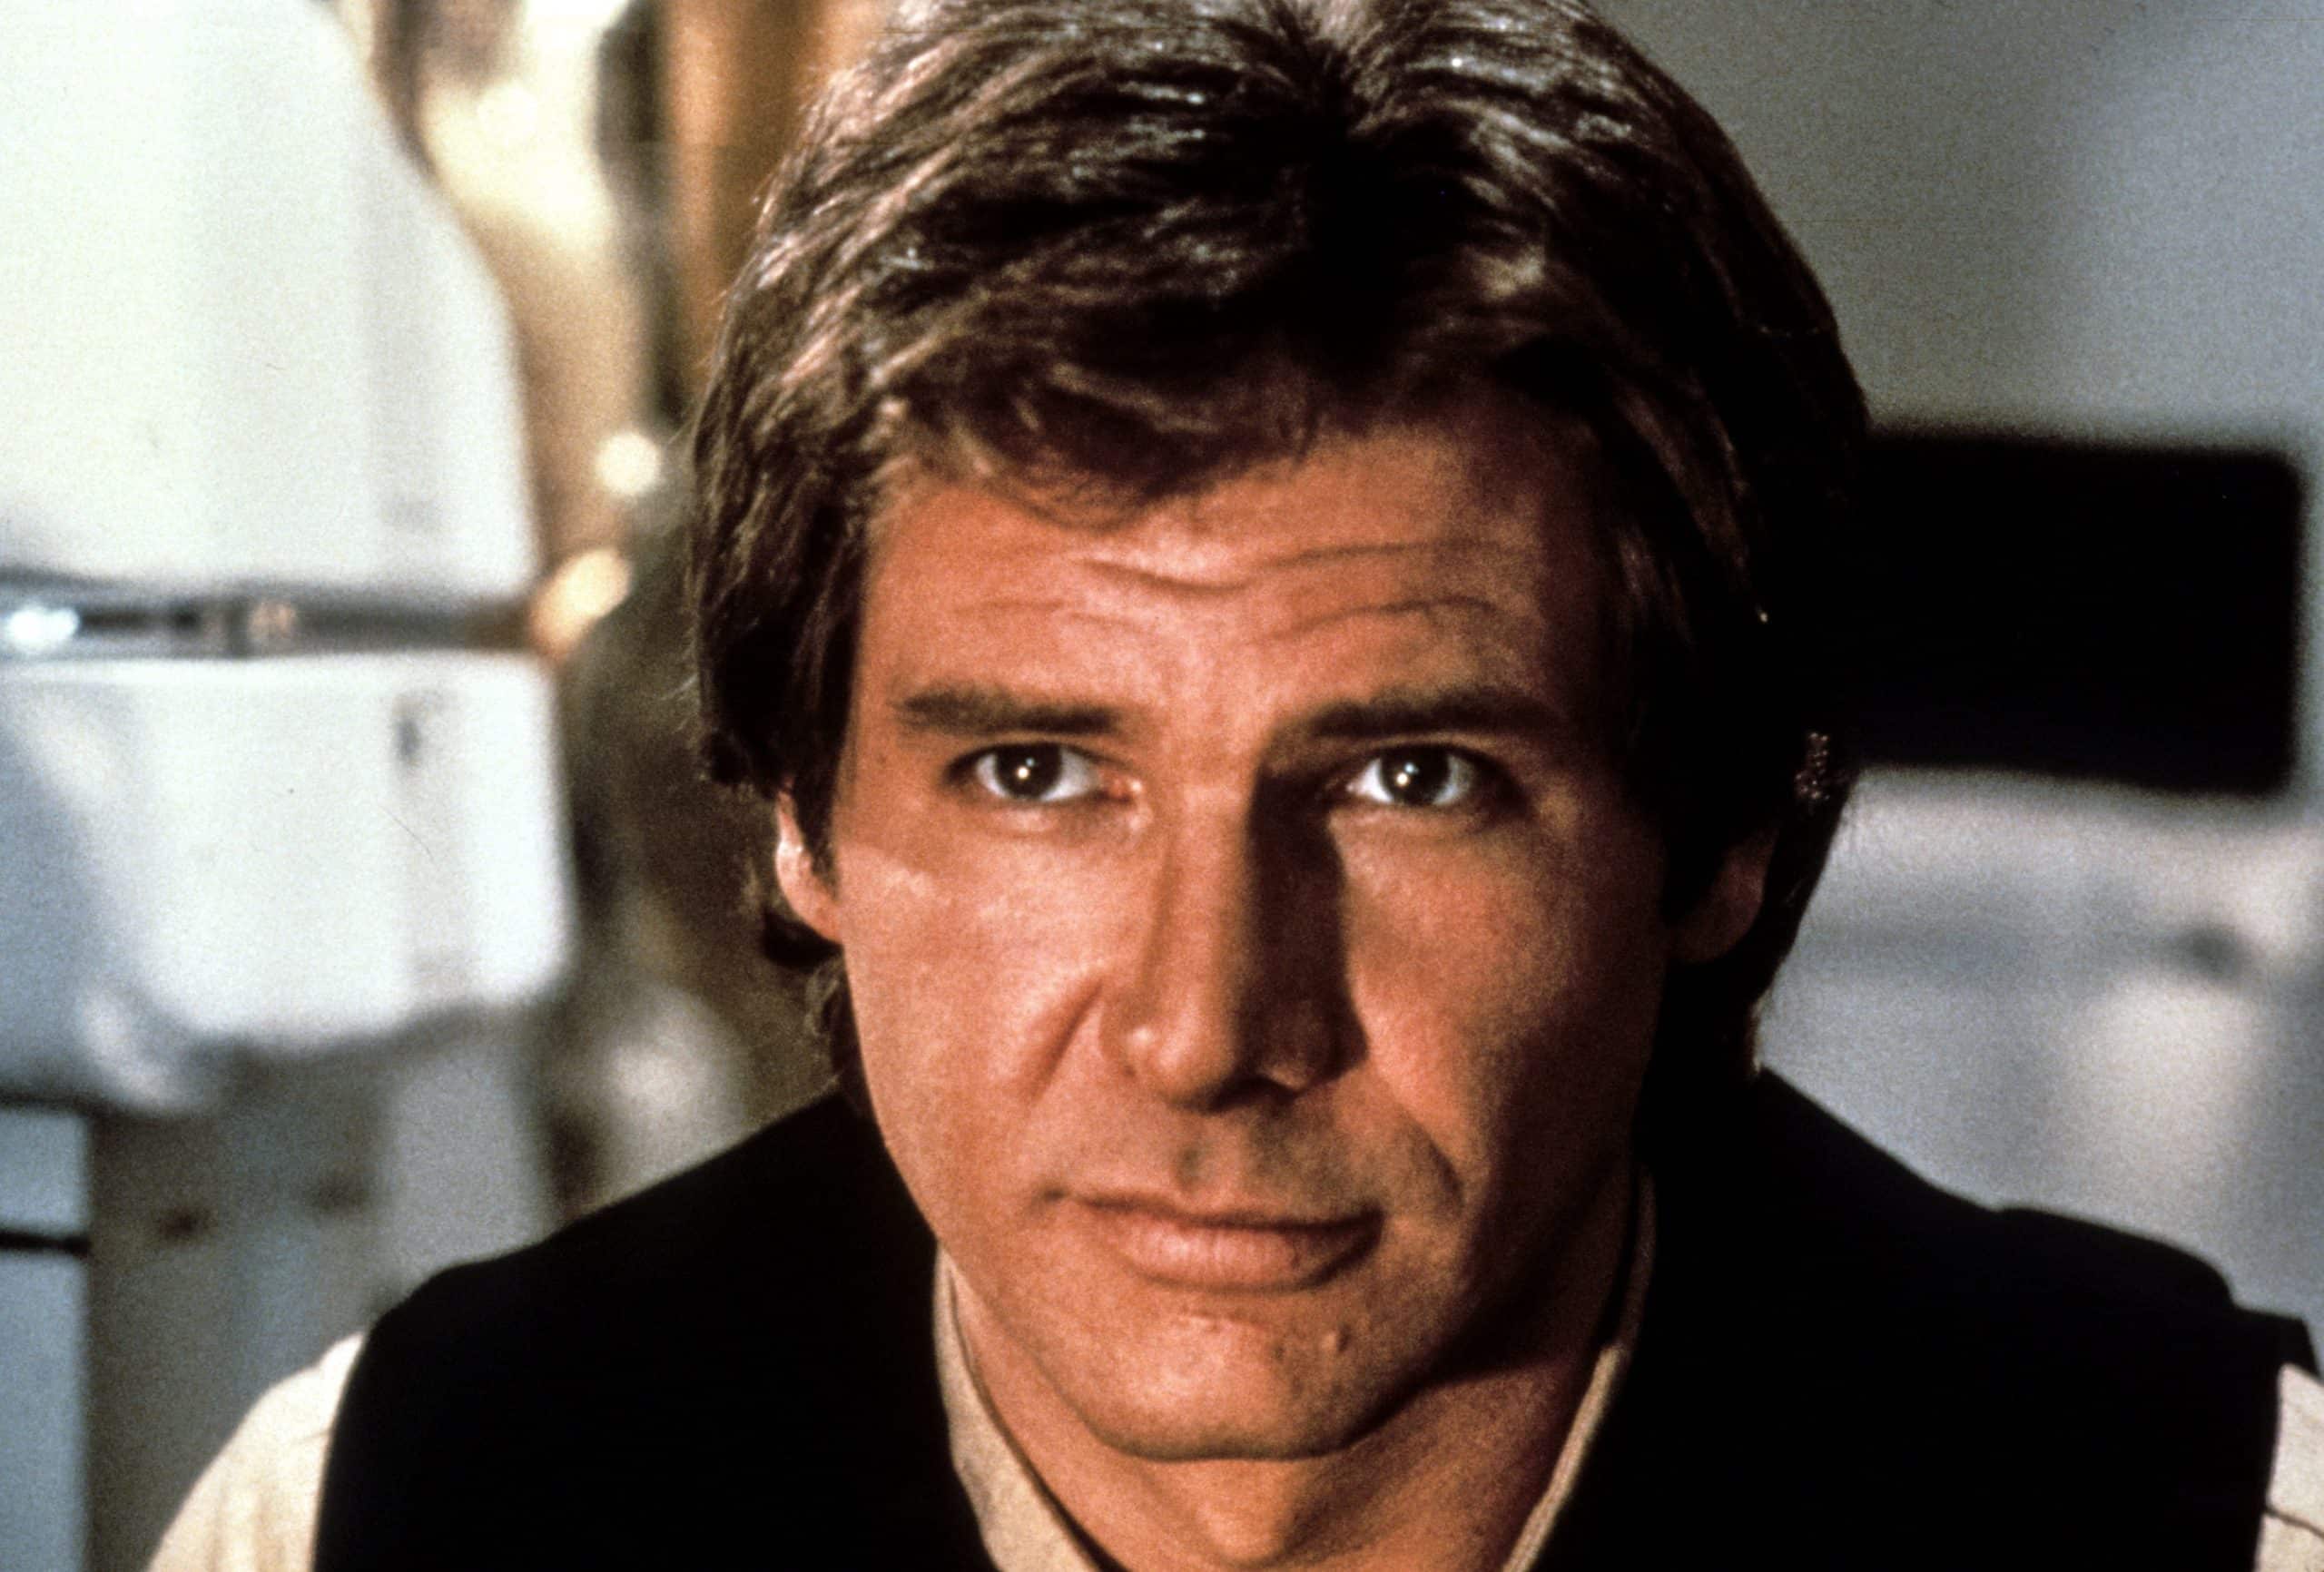 STAR WARS: EPISODE IV-A NEW HOPE, Harrison Ford as Han Solo, 1977